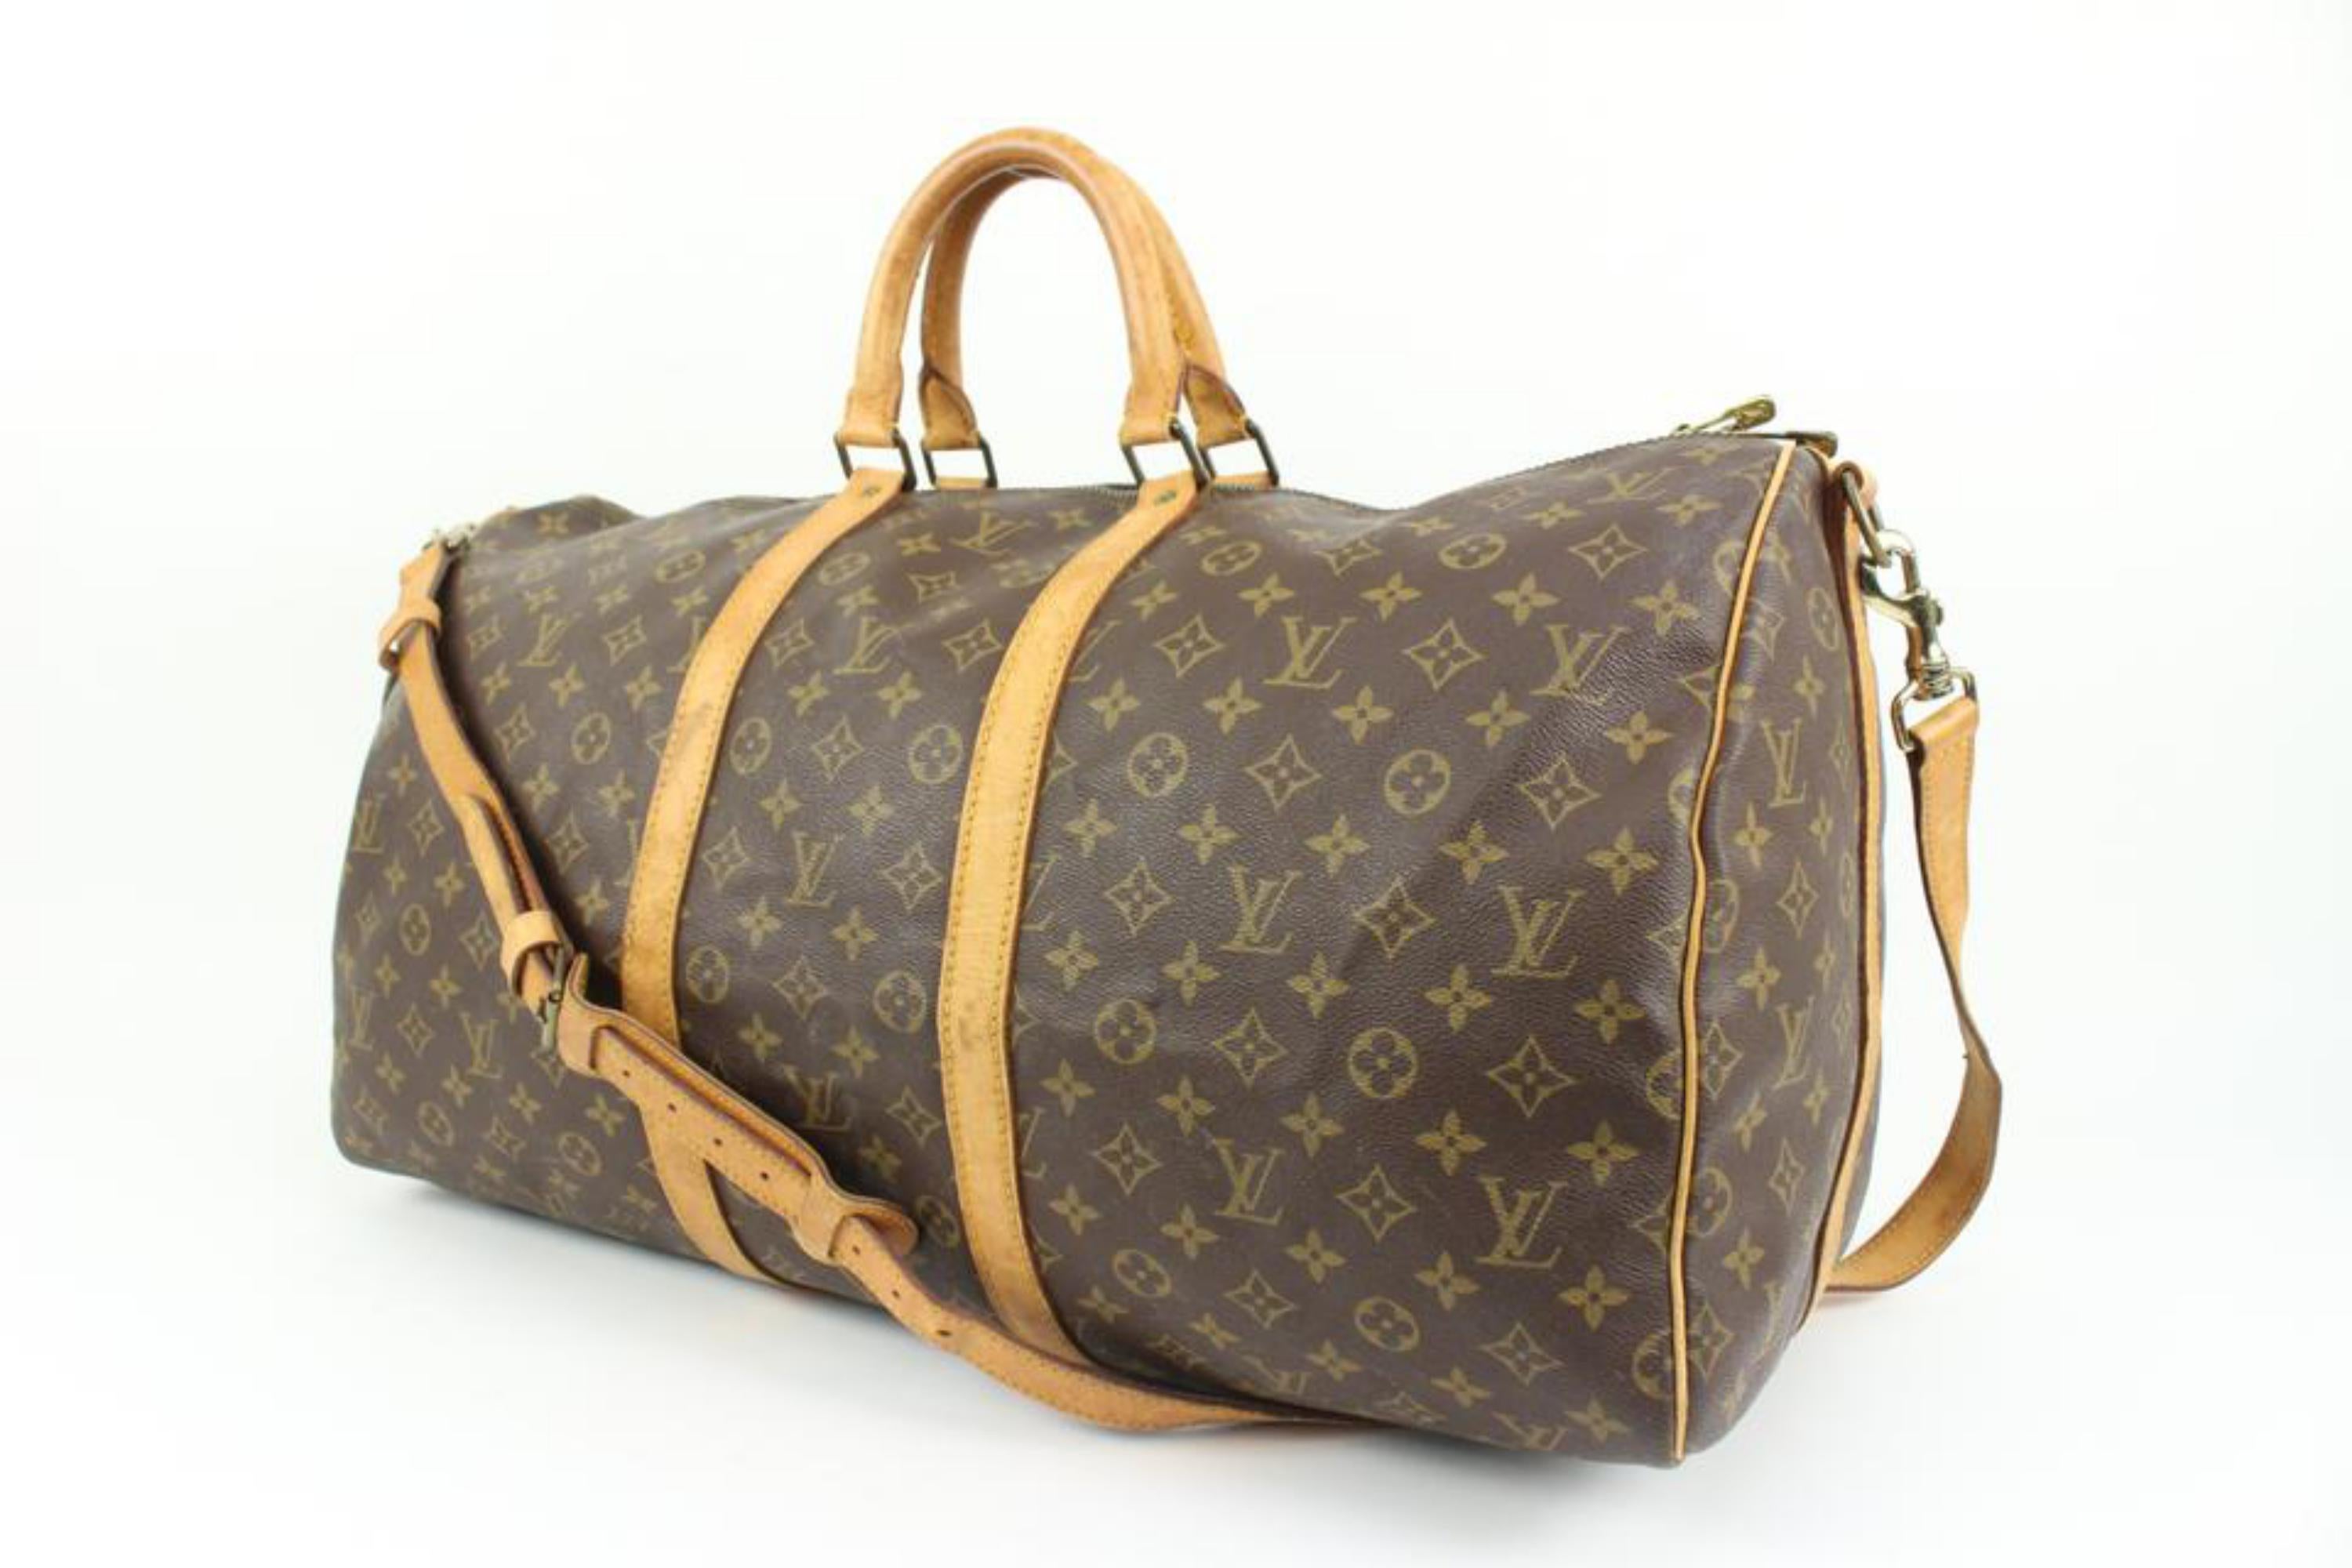 Louis Vuitton Monogram Keepall Bandouliere 55 Duffle Bag with Strap 15lk412s
Date Code/Serial Number: 851 SD
Made In: France
Measurements: Length:  22